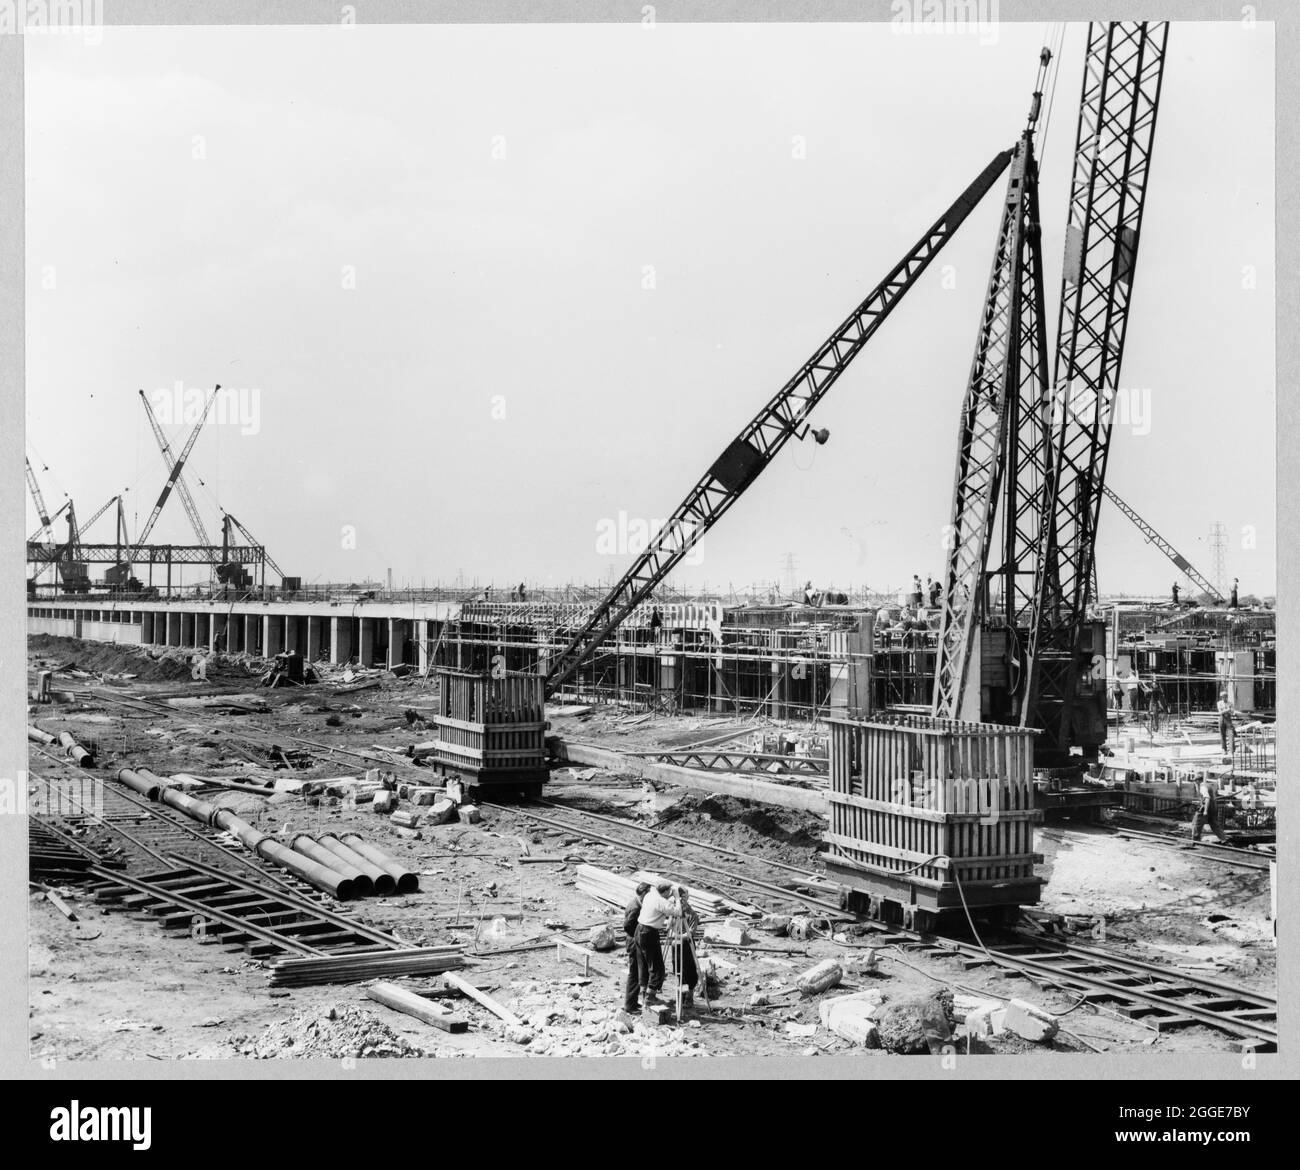 A view of the new foundry under construction at the Ford Motor Company Works, showing the south-east end of the building with reinforcing steel, formwork and concrete pouring in progress. This image was catalogued as part of the Breaking New Ground Project in partnership with the John Laing Charitable Trust in 2019-20. Stock Photo